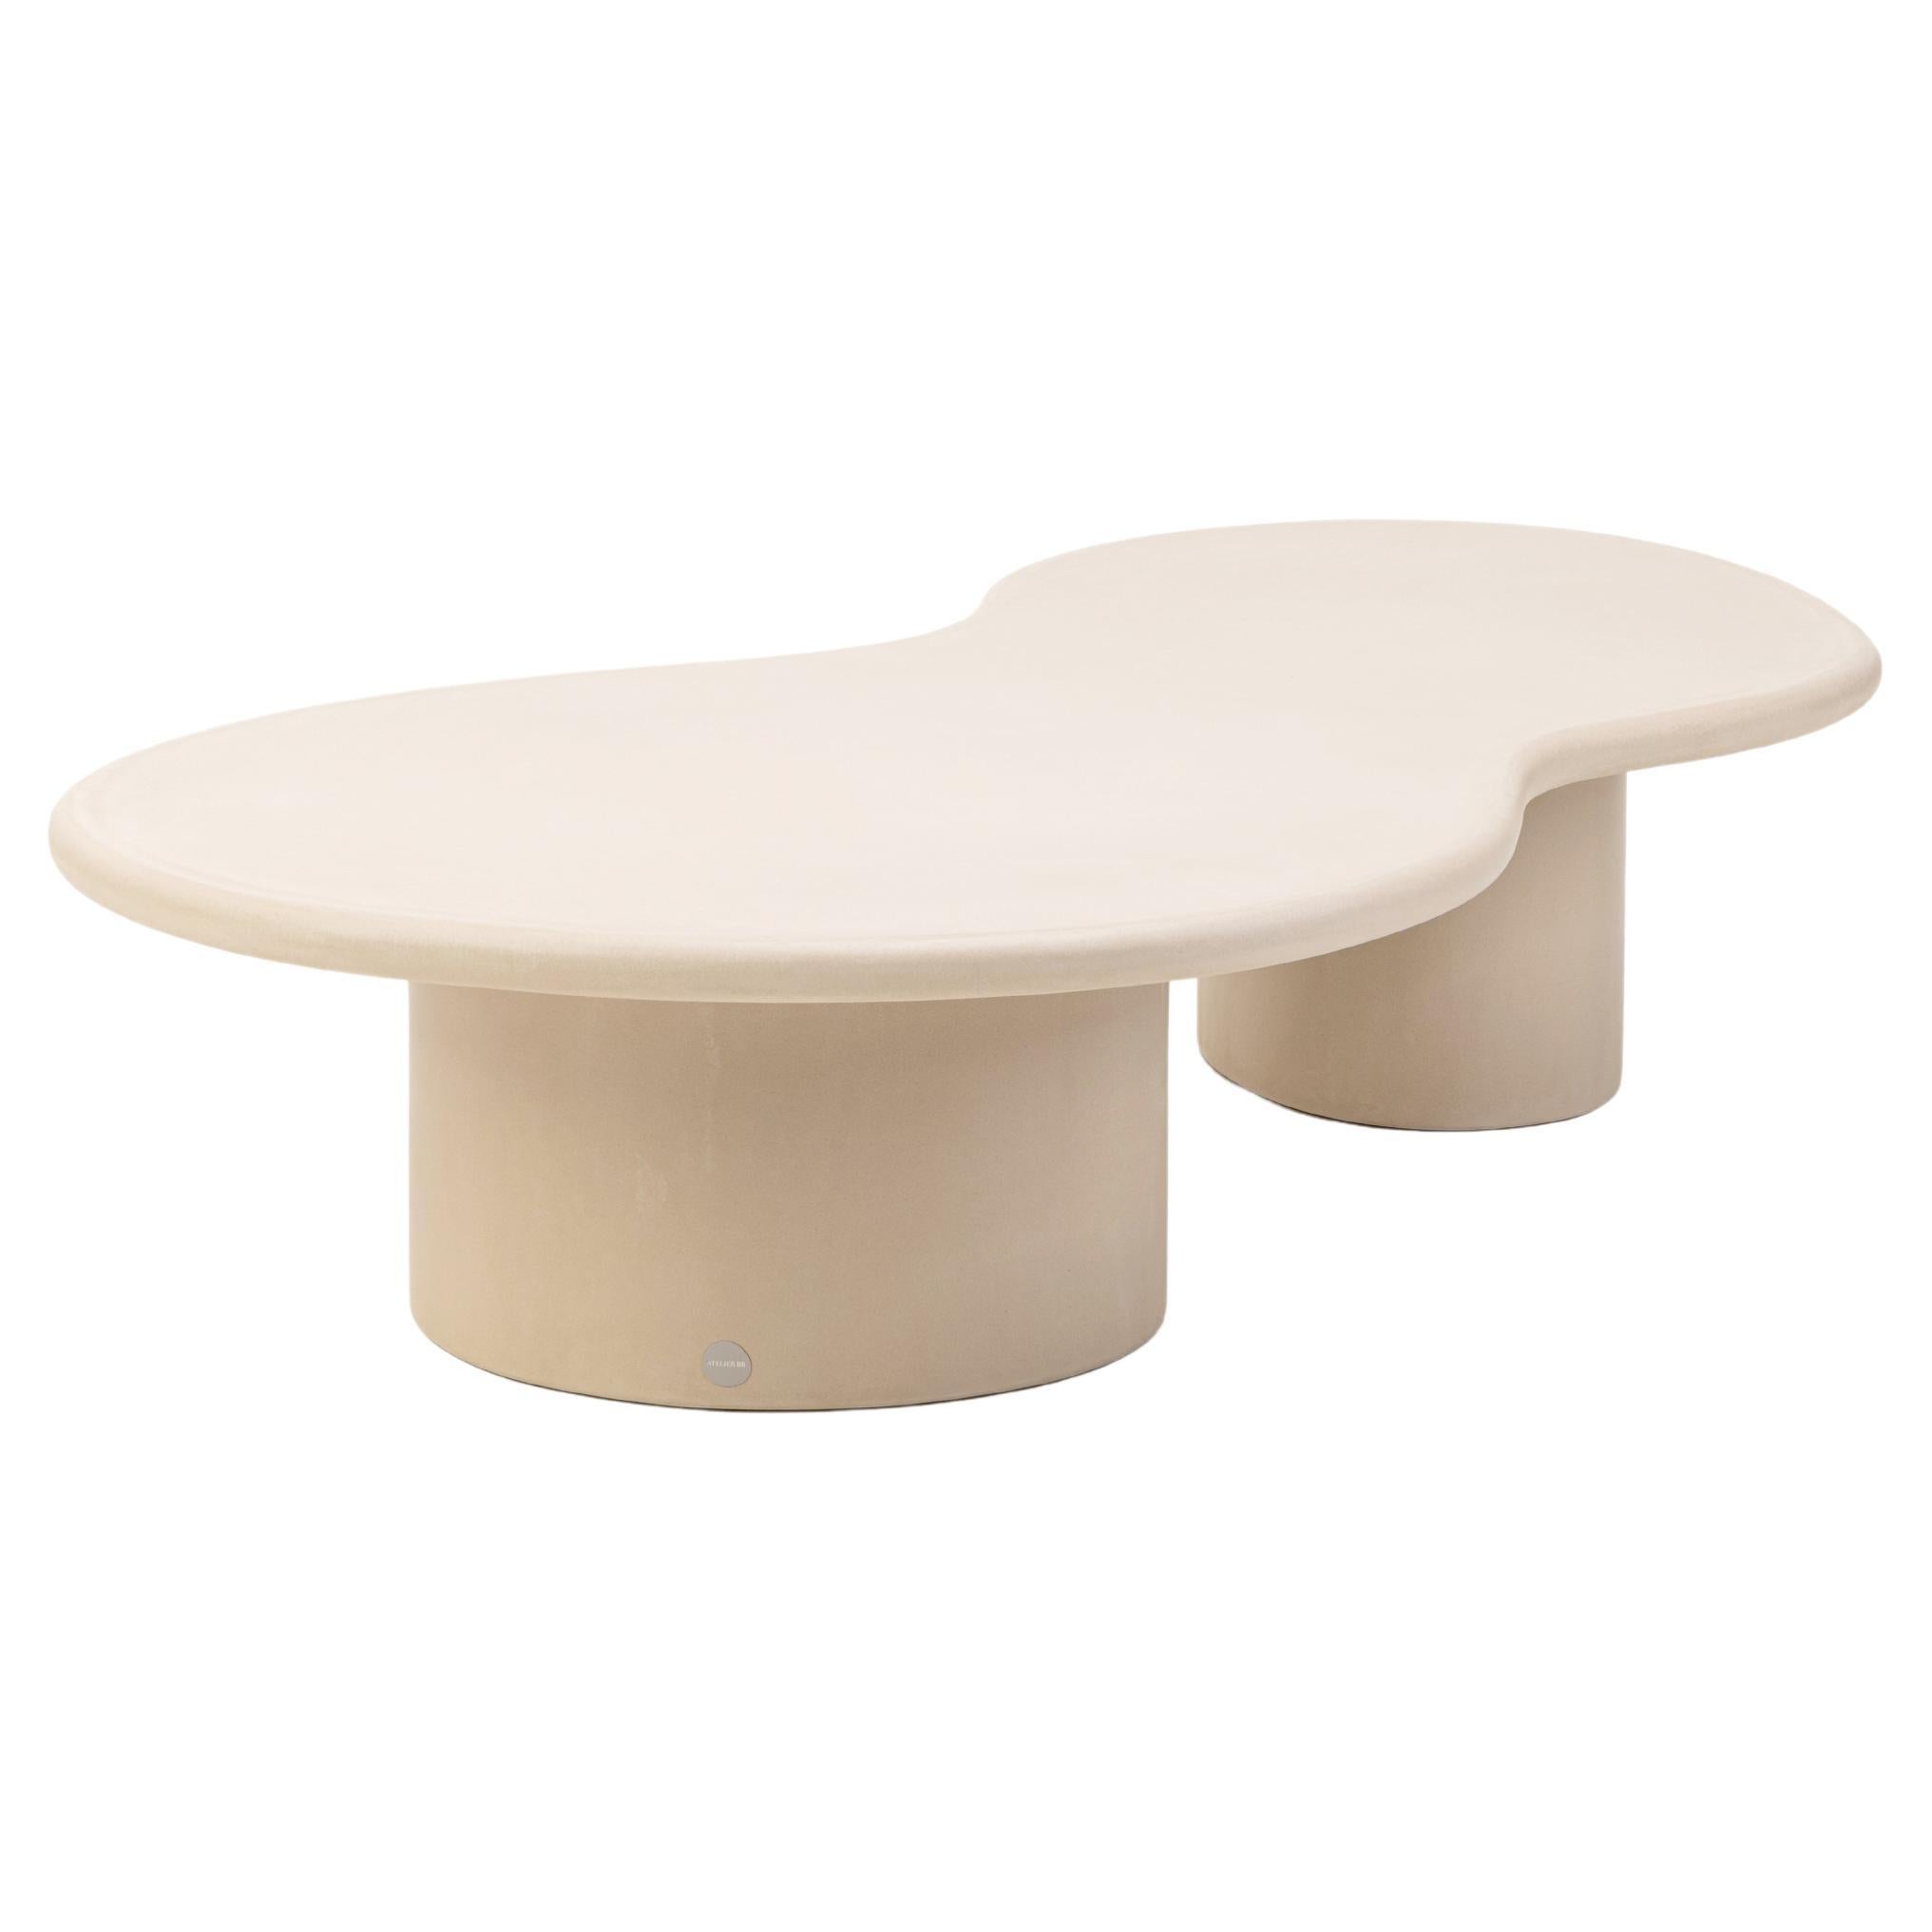 Organic Shaped Natural Plaster Coffee Table "Ovum" 170 by Isabelle Beaumont For Sale